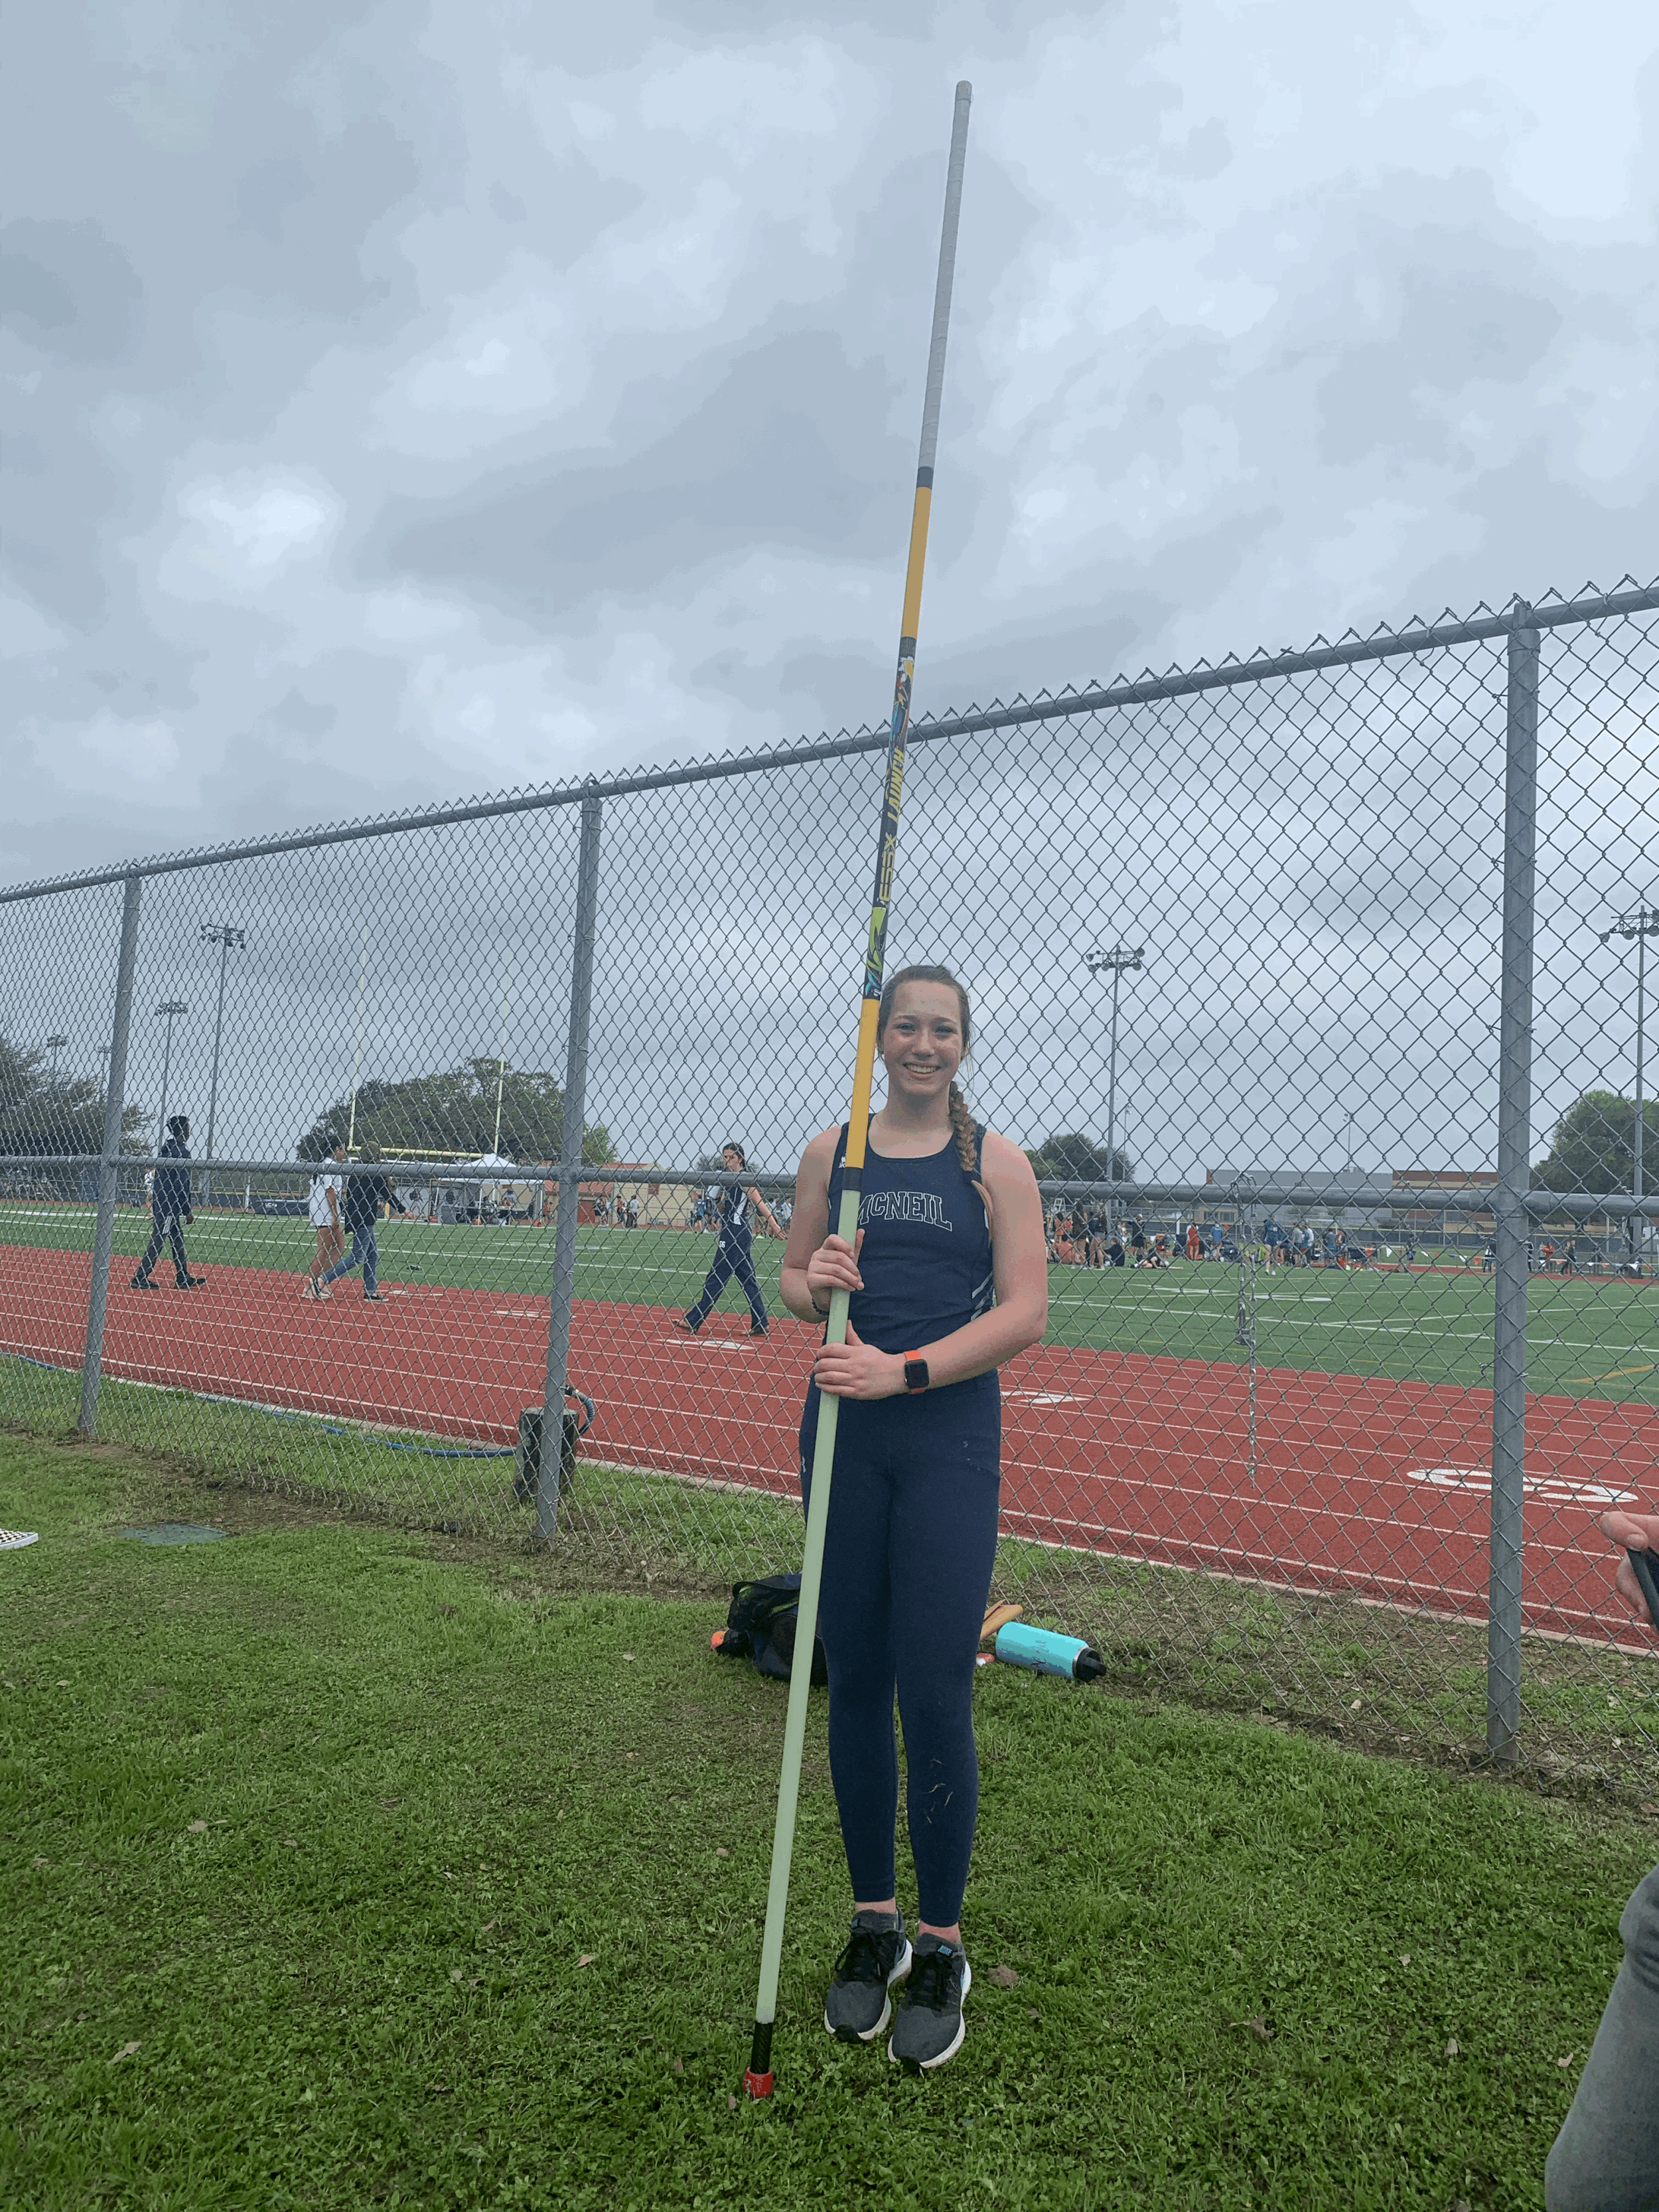  - Pole vaulting: the only sport where my SEVEN daughter feels like she’s flying!